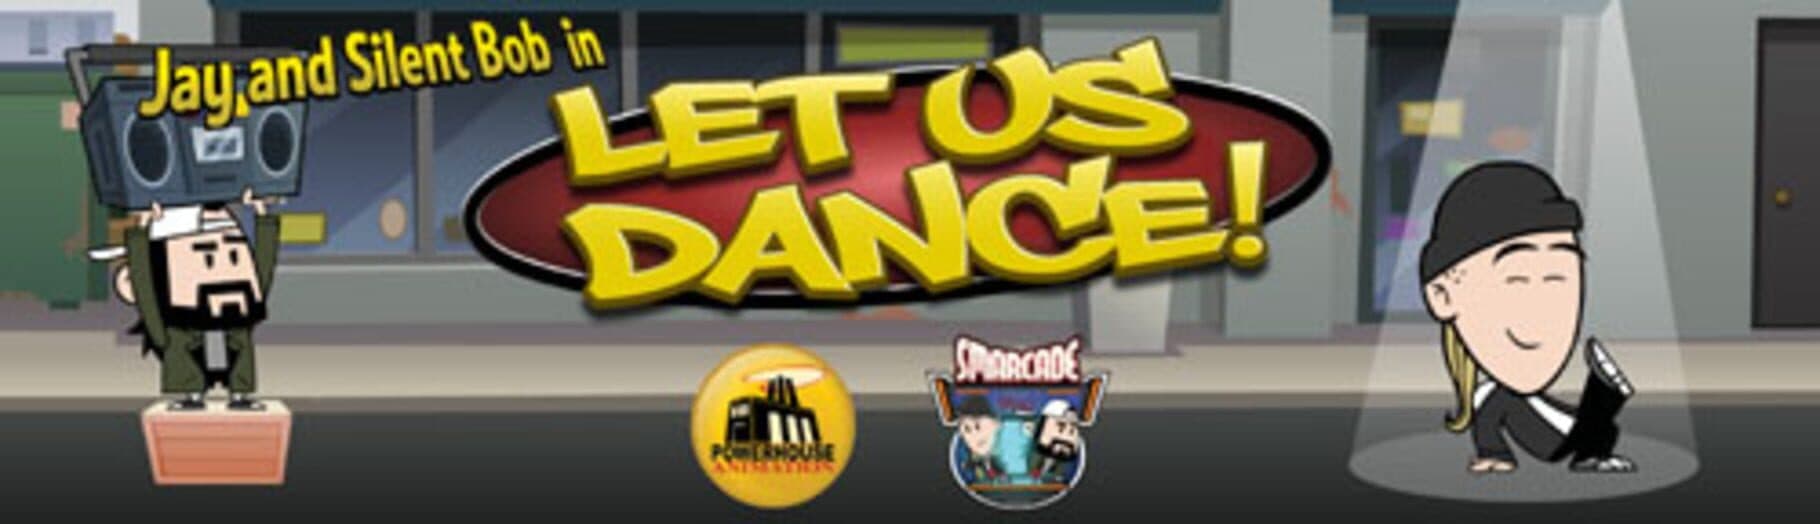 Jay and Silent Bob in: Let Us Dance cover art